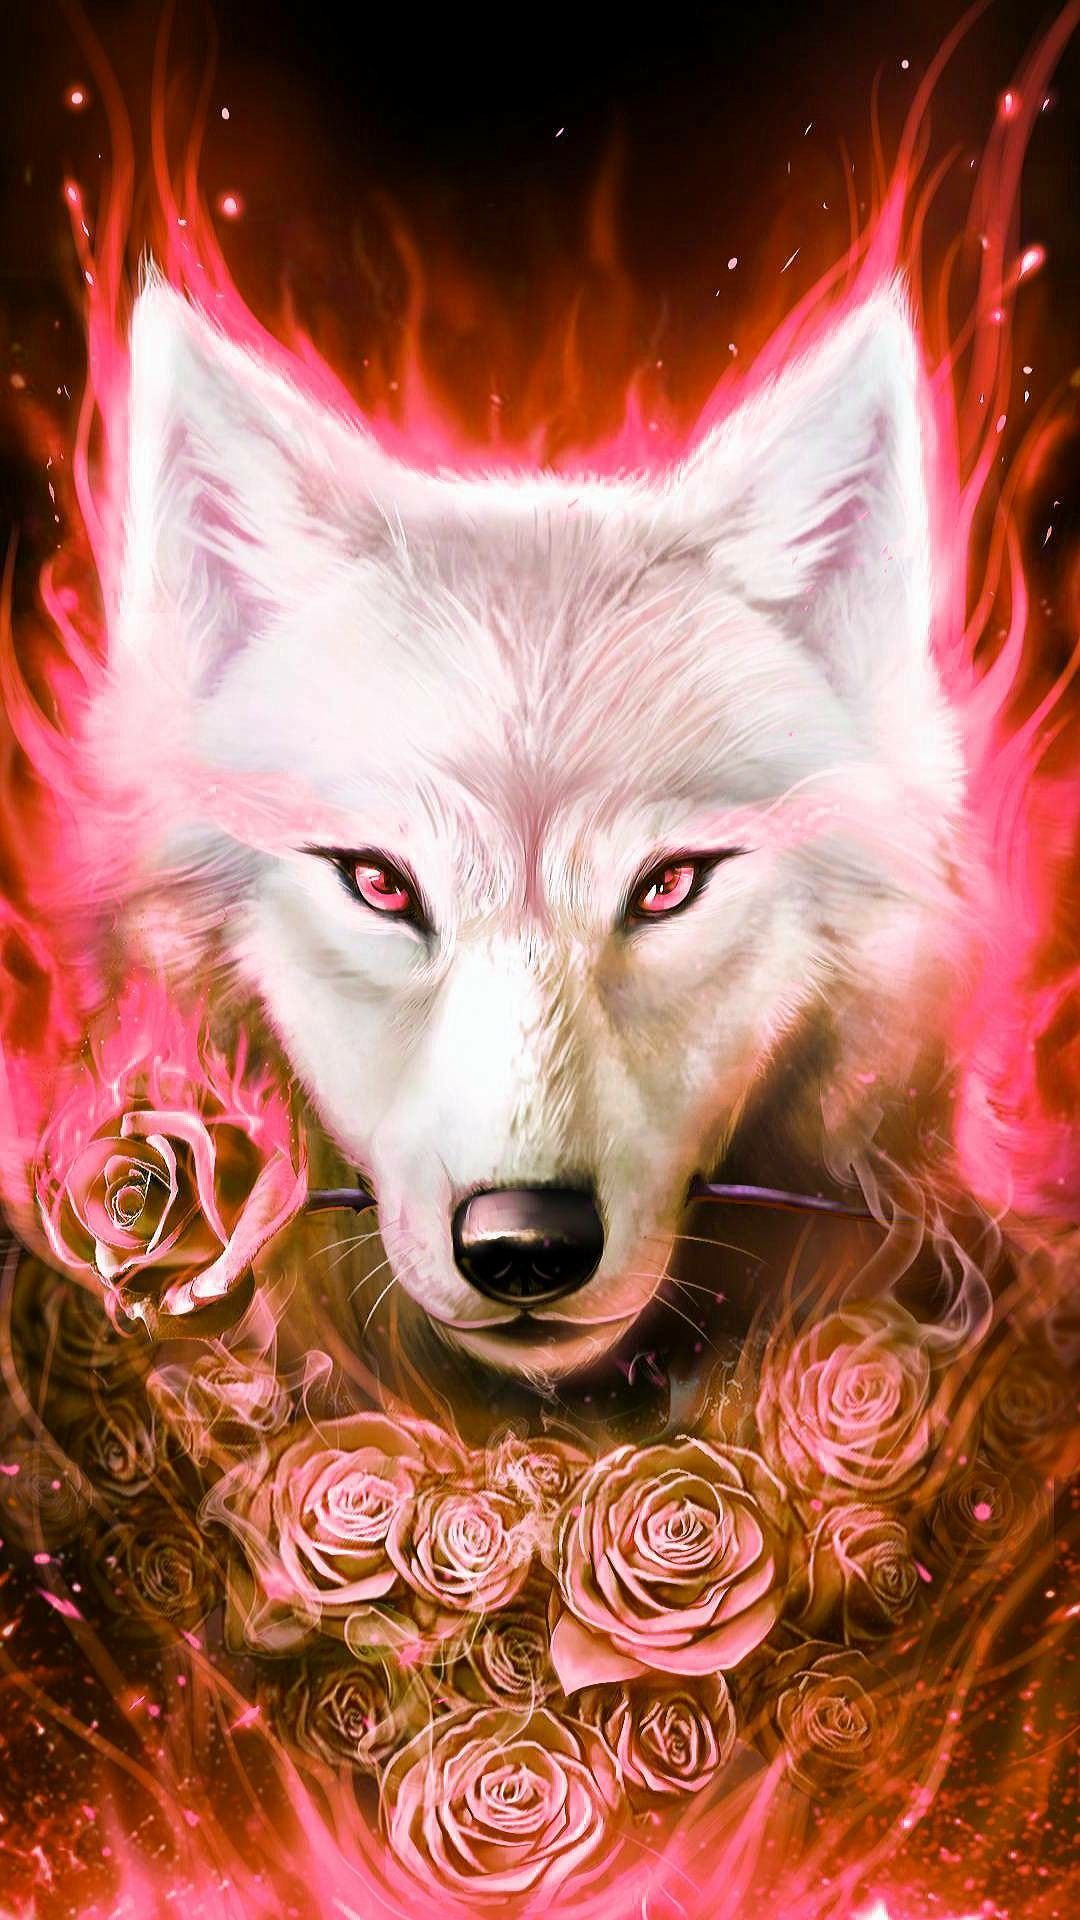 Beautiful Wolves Wallpapers Wallpapers